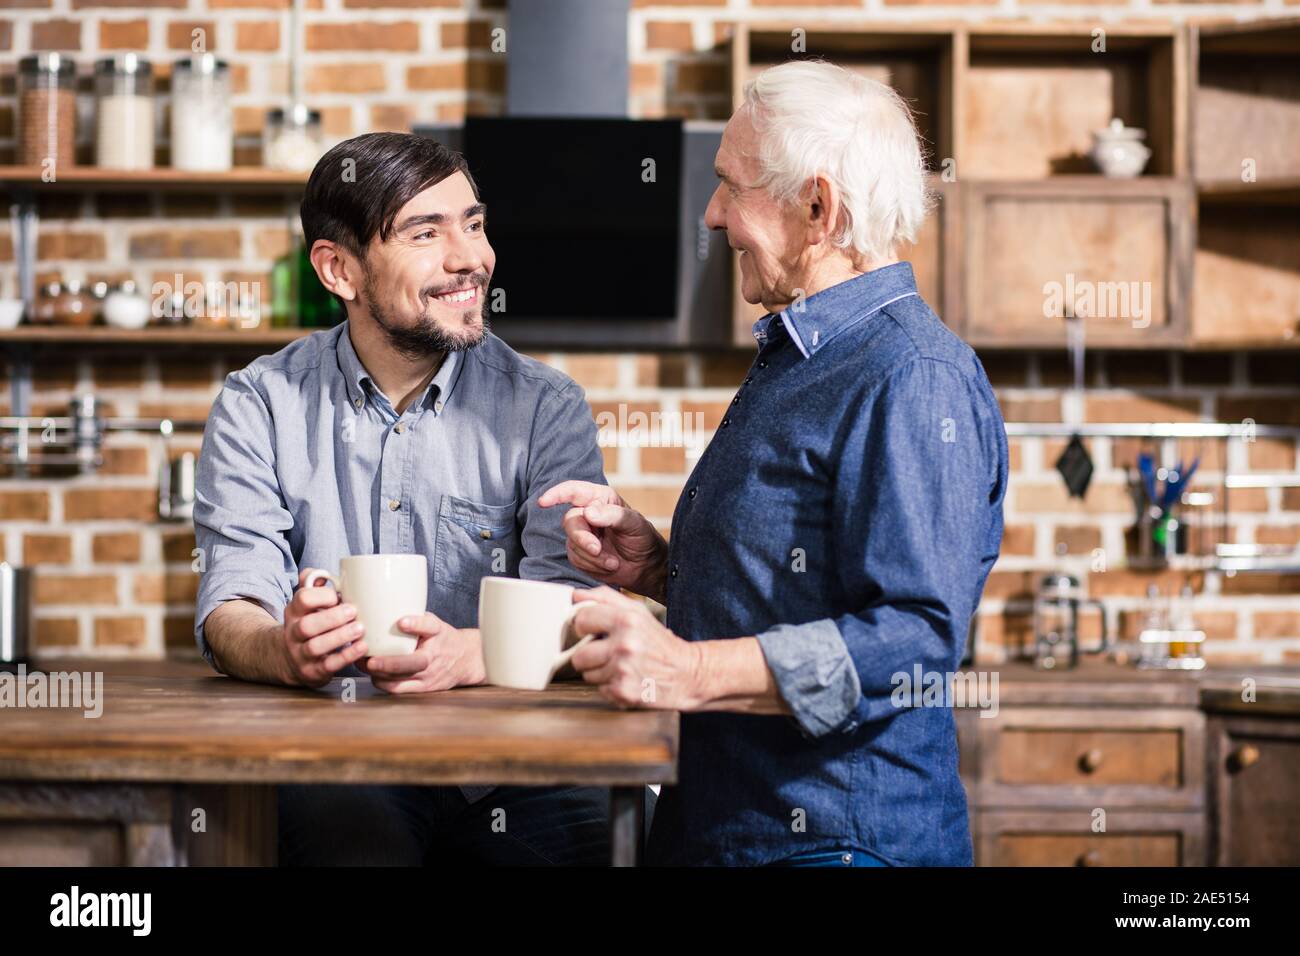 Pleasant smiling man drinking tea with his son Stock Photo